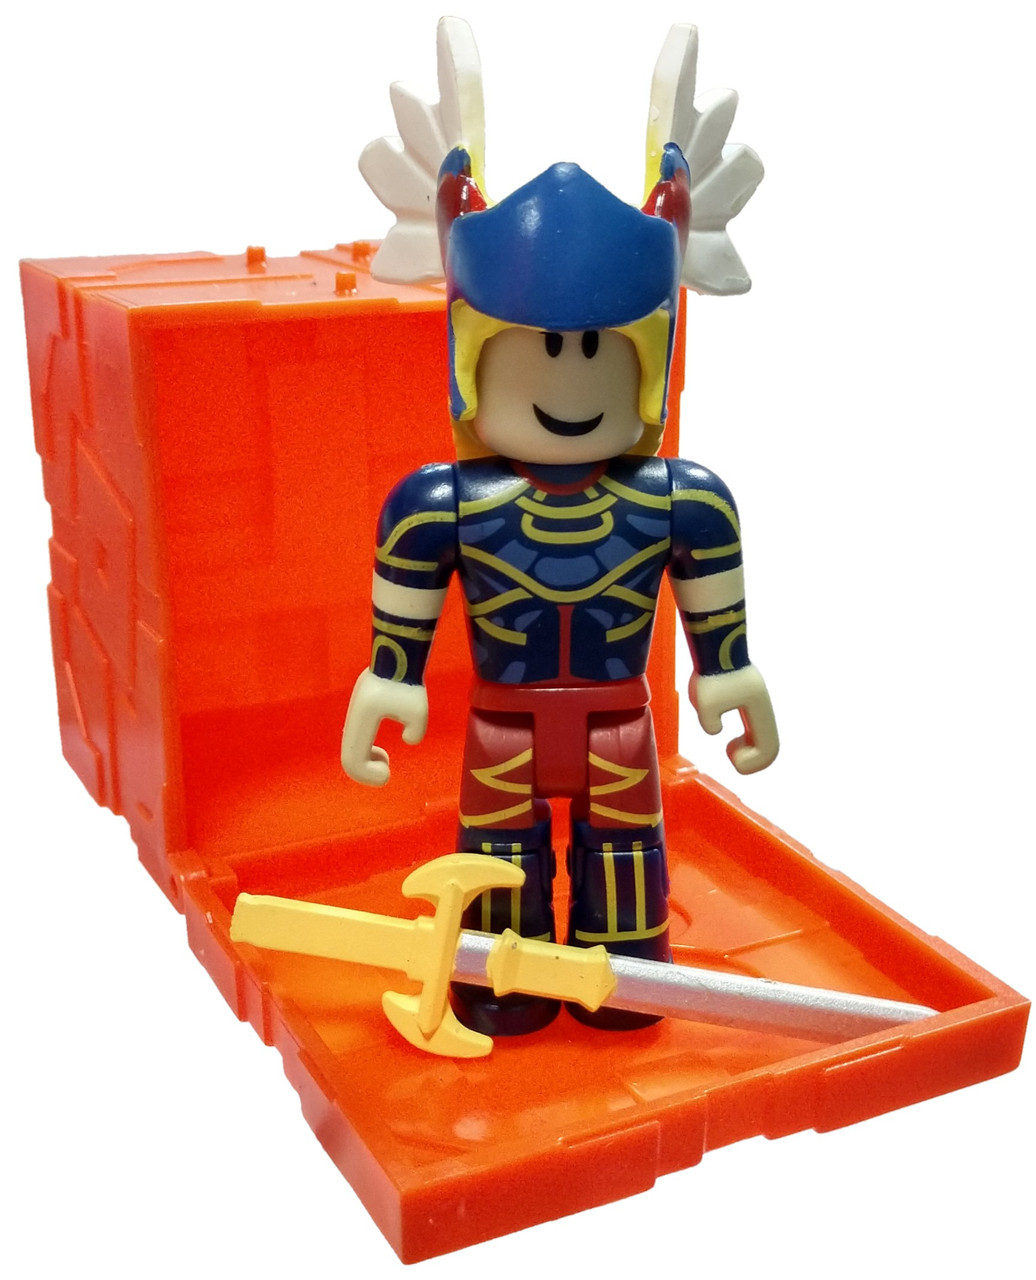 Roblox Series 6 Summoner Tycoon Valkyrie 3 Mini Figure With Orange Cube And Online Code Loose Jazwares Toywiz - roblox red valkyrie promo code